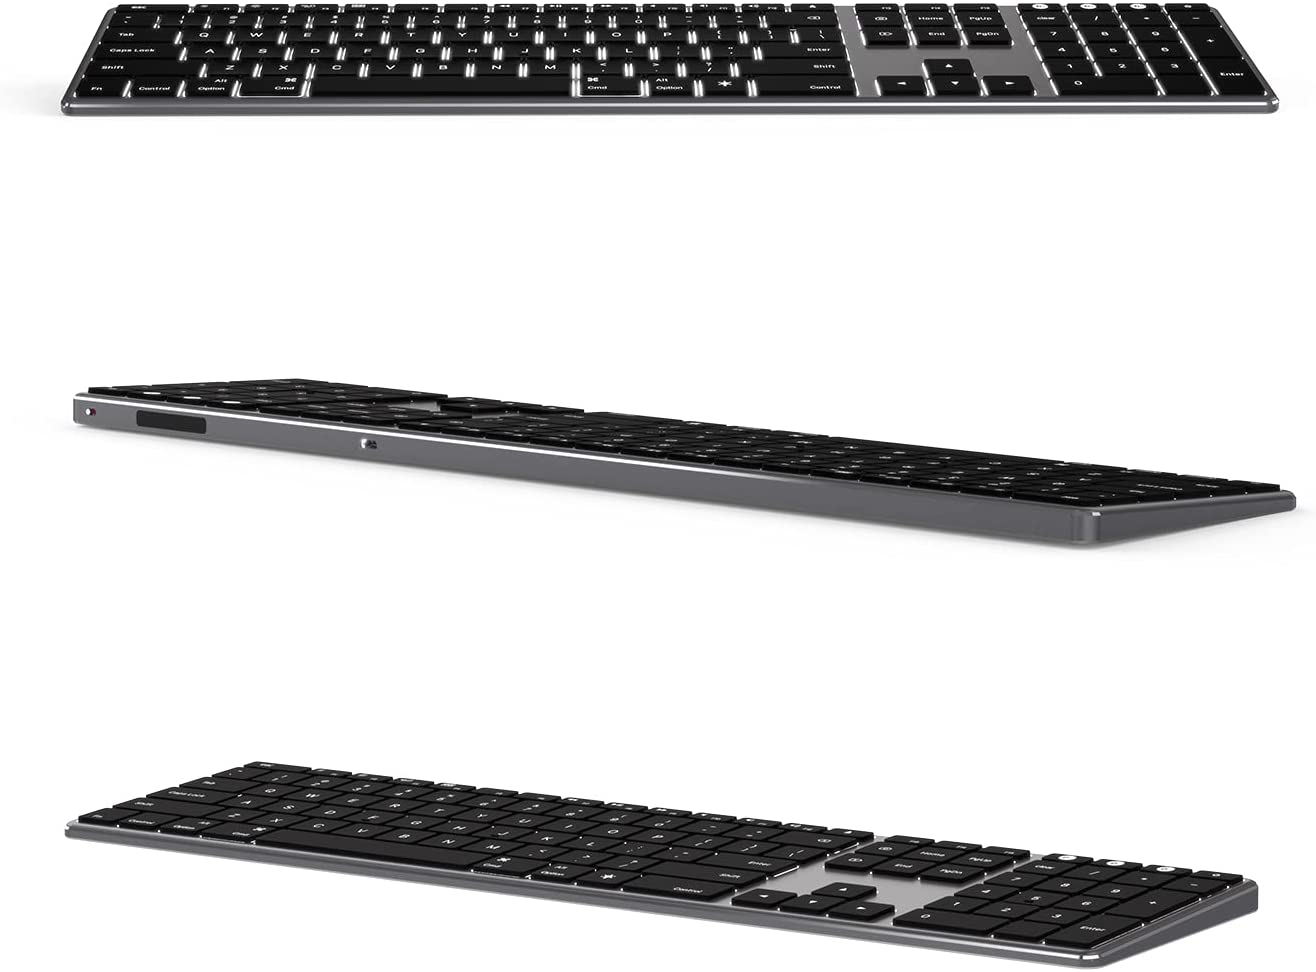 Backlit Bluetooth Keyboard for Mac, Advanced Aluminum Multi-Device Keyboard, Ultra-Slim Rechargeable Wireless Keyboard, Compatible with Apple Macbook Pro/Air, Imac, Ipad, Iphone